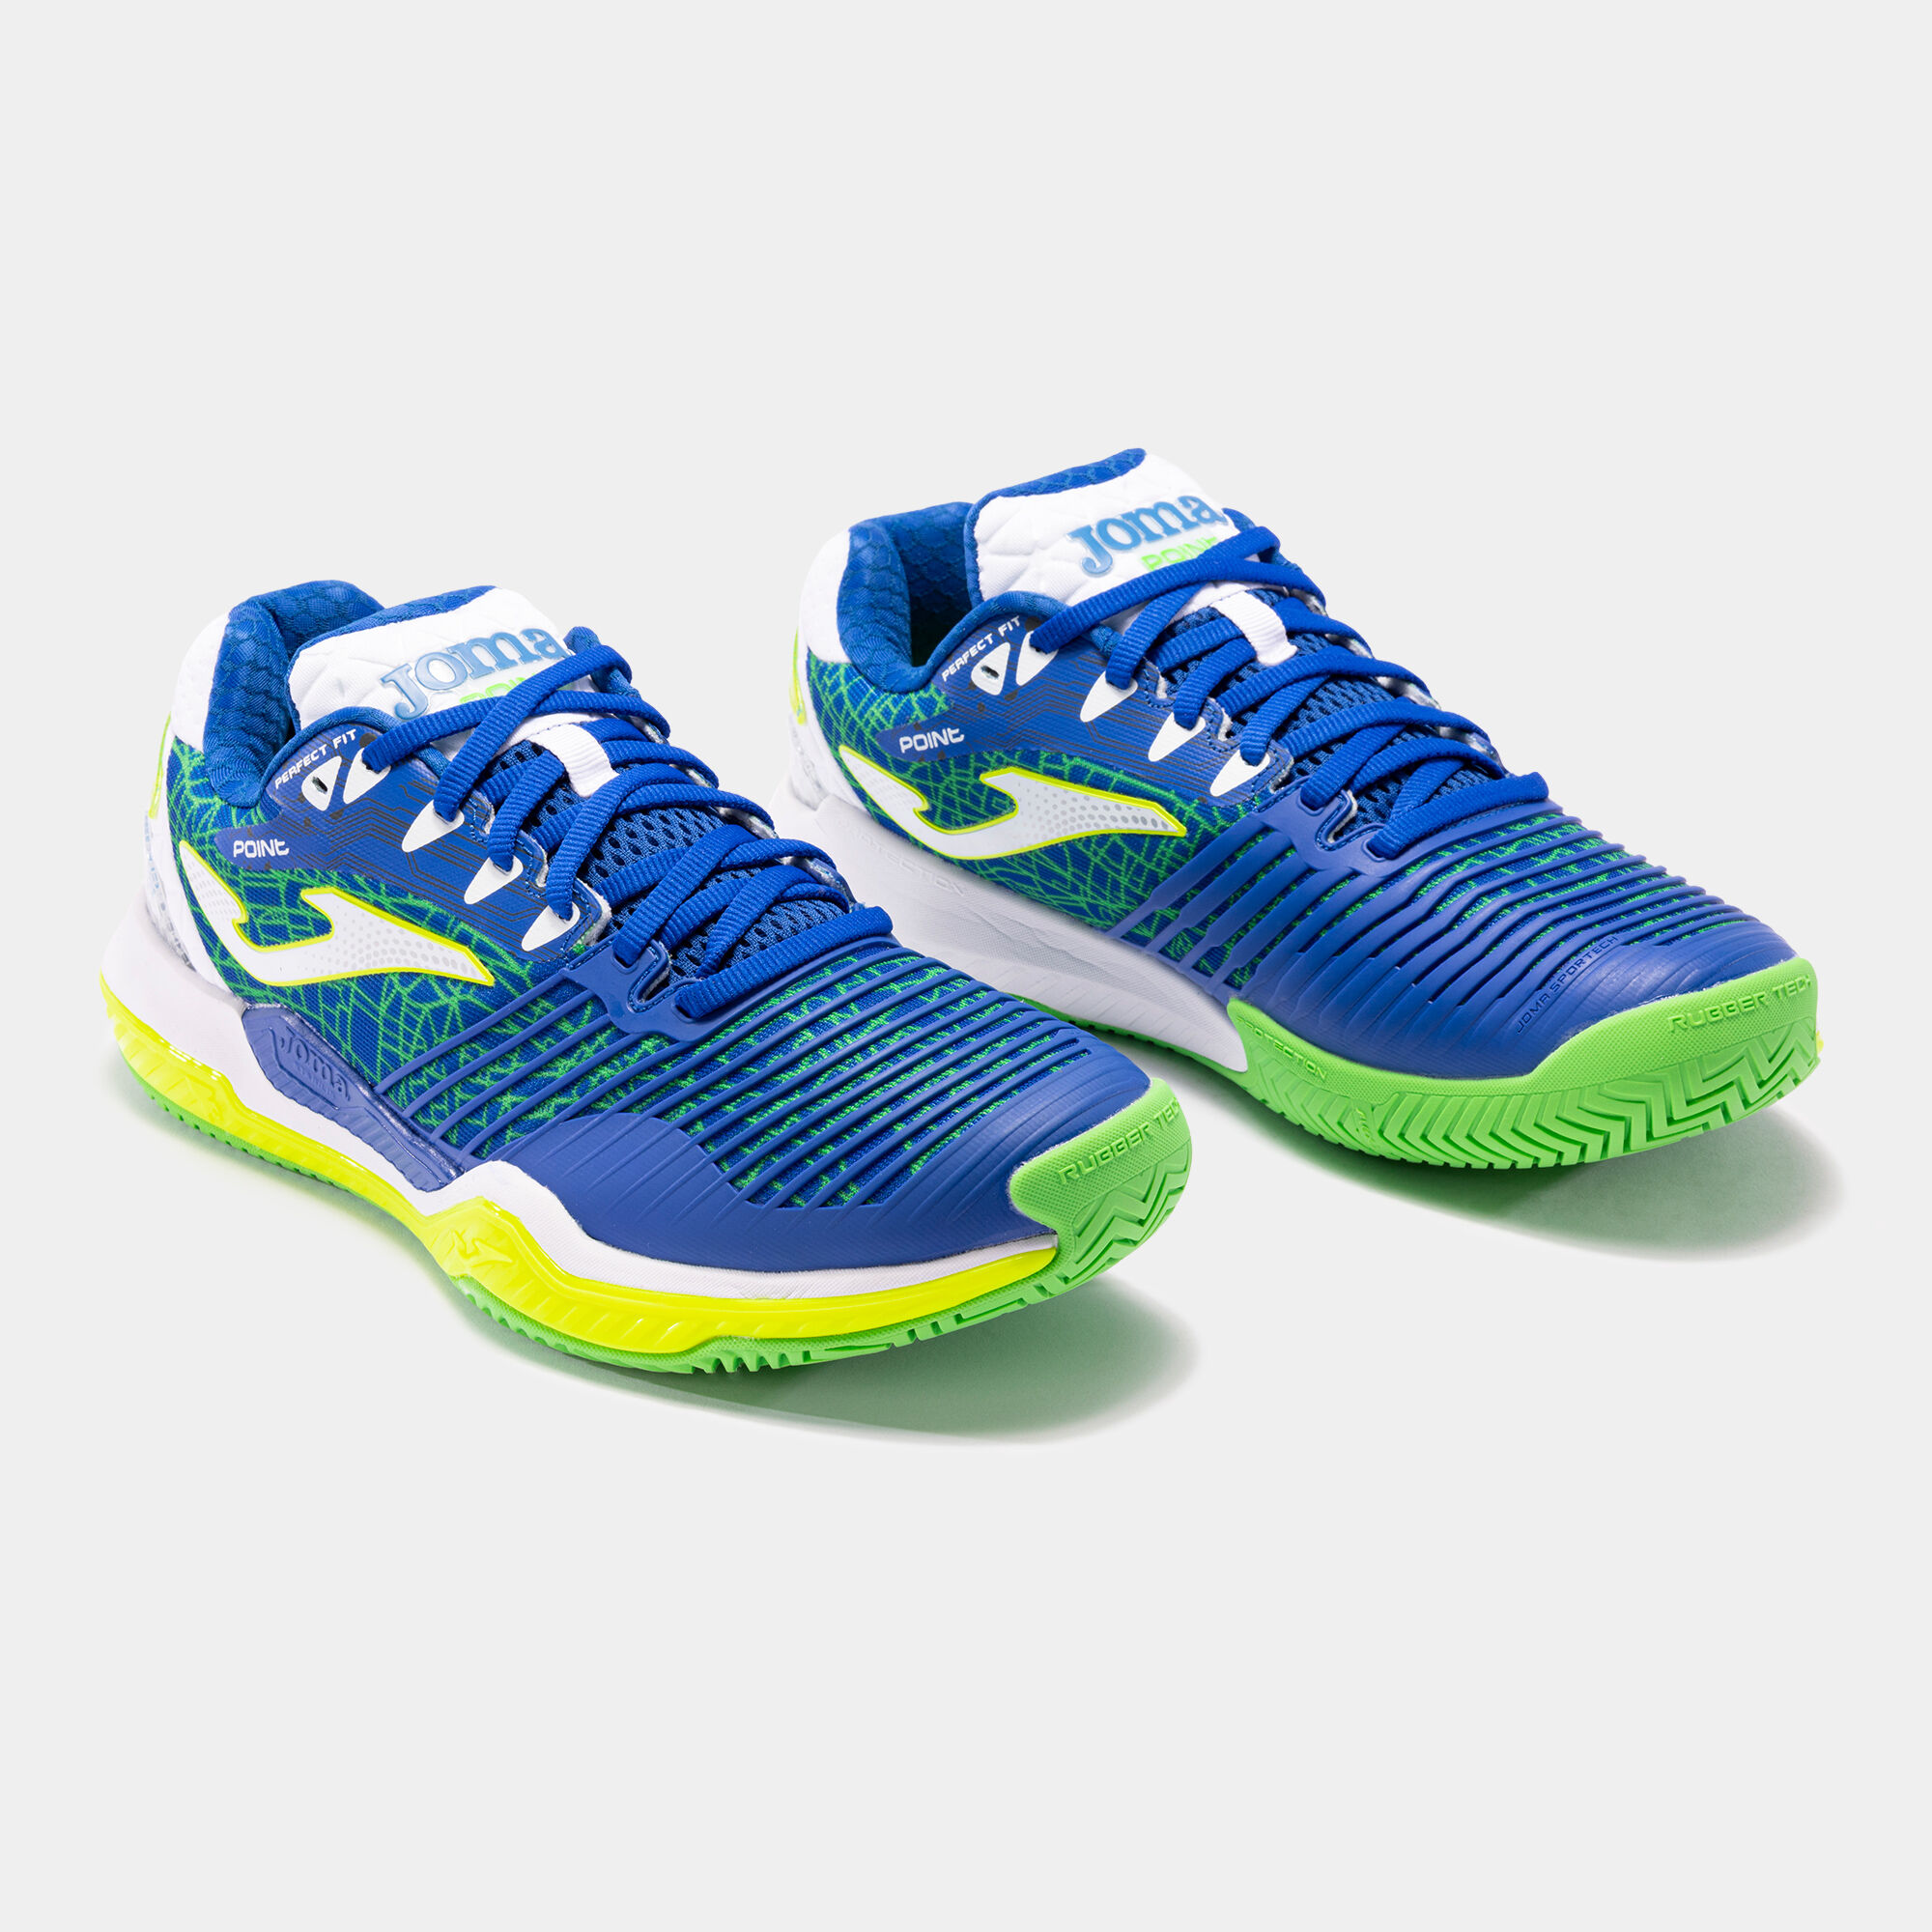 SHOES POINT 22 HARD COURT UNISEX ROYAL BLUE FLUORESCENT YELLOW